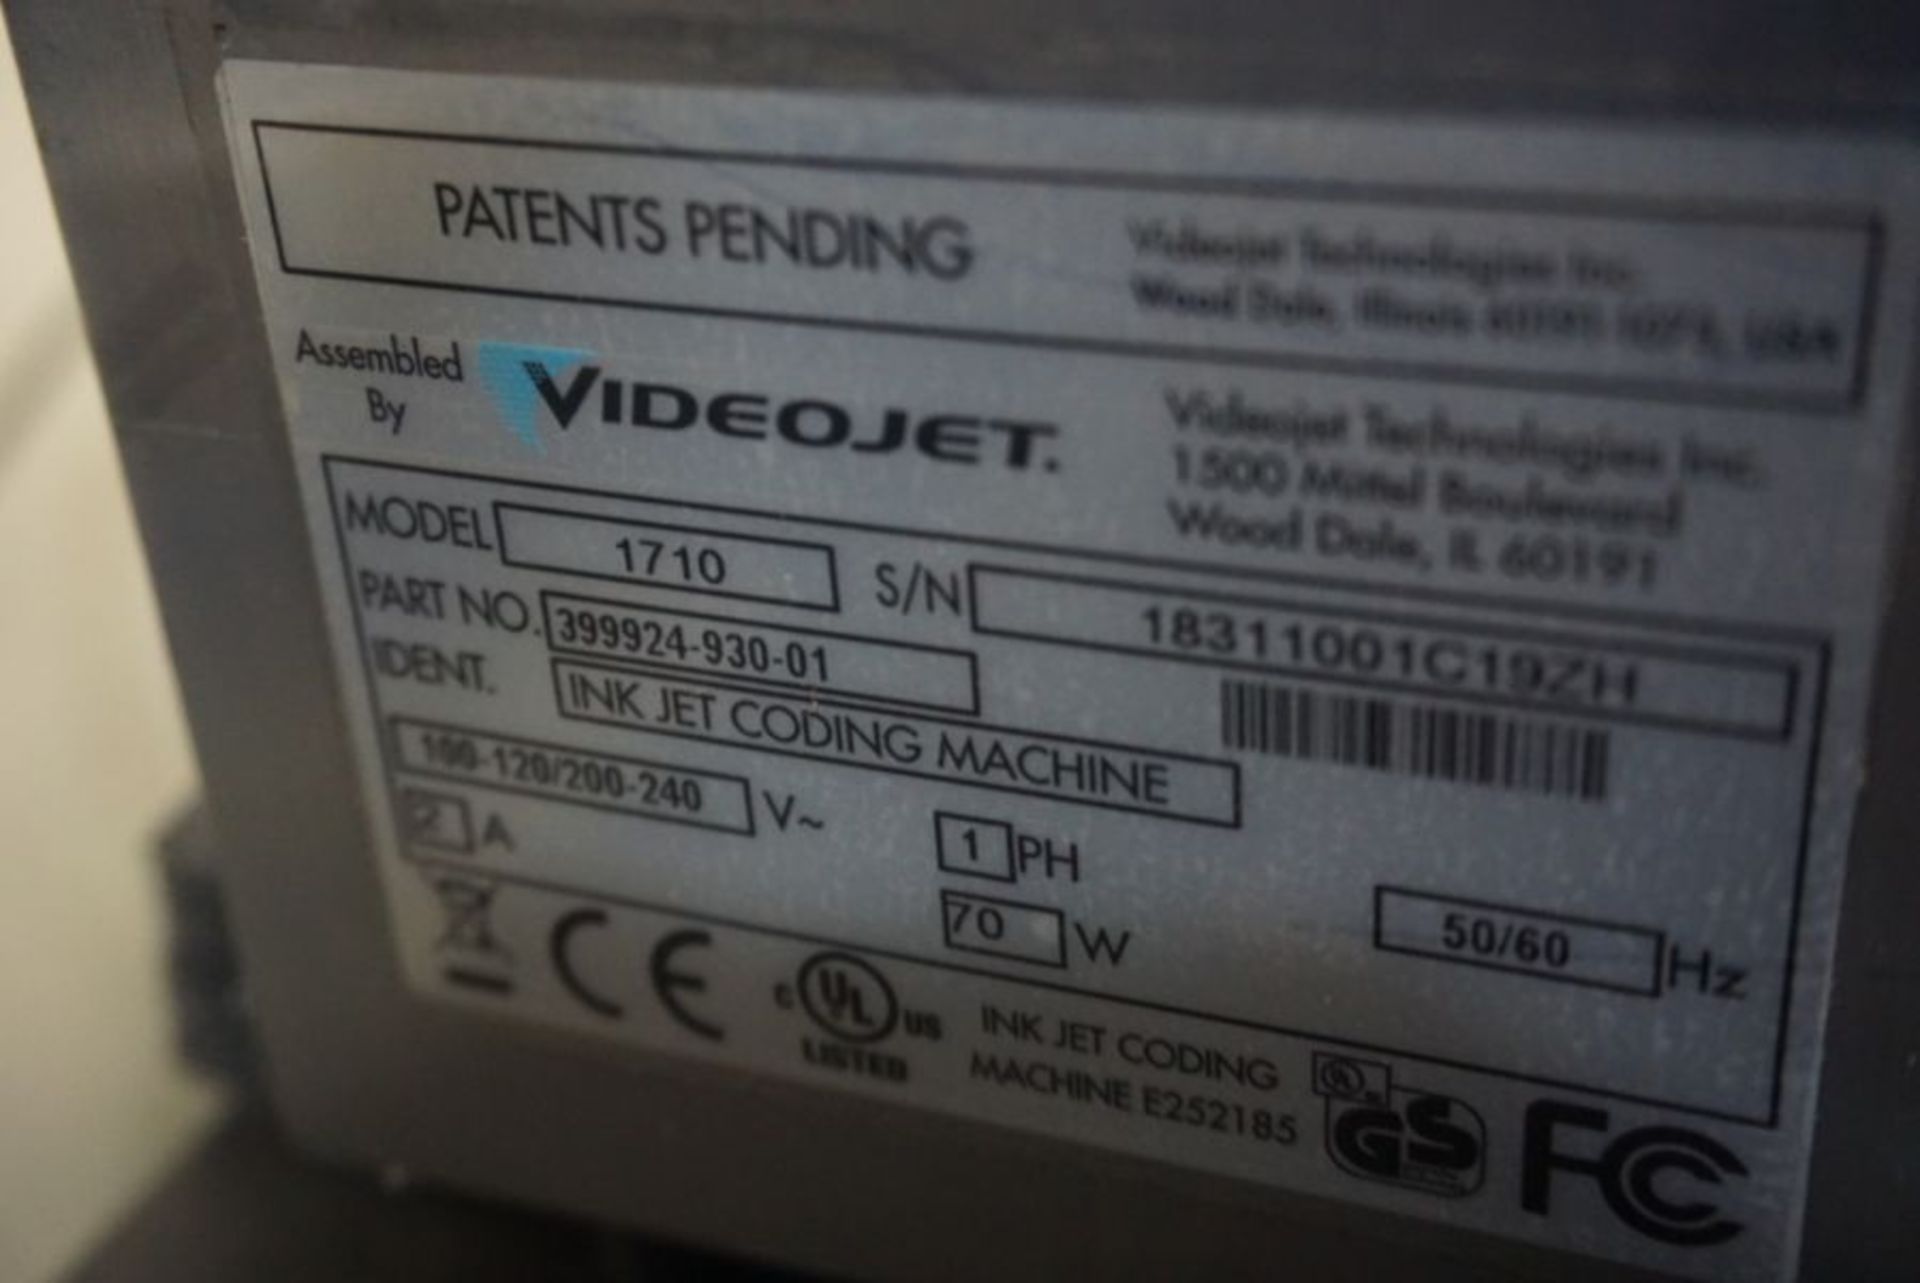 Video Jet 1710 Printer s/n 18311001C19ZH *Late Delivery January 31, 2021* - Image 4 of 4